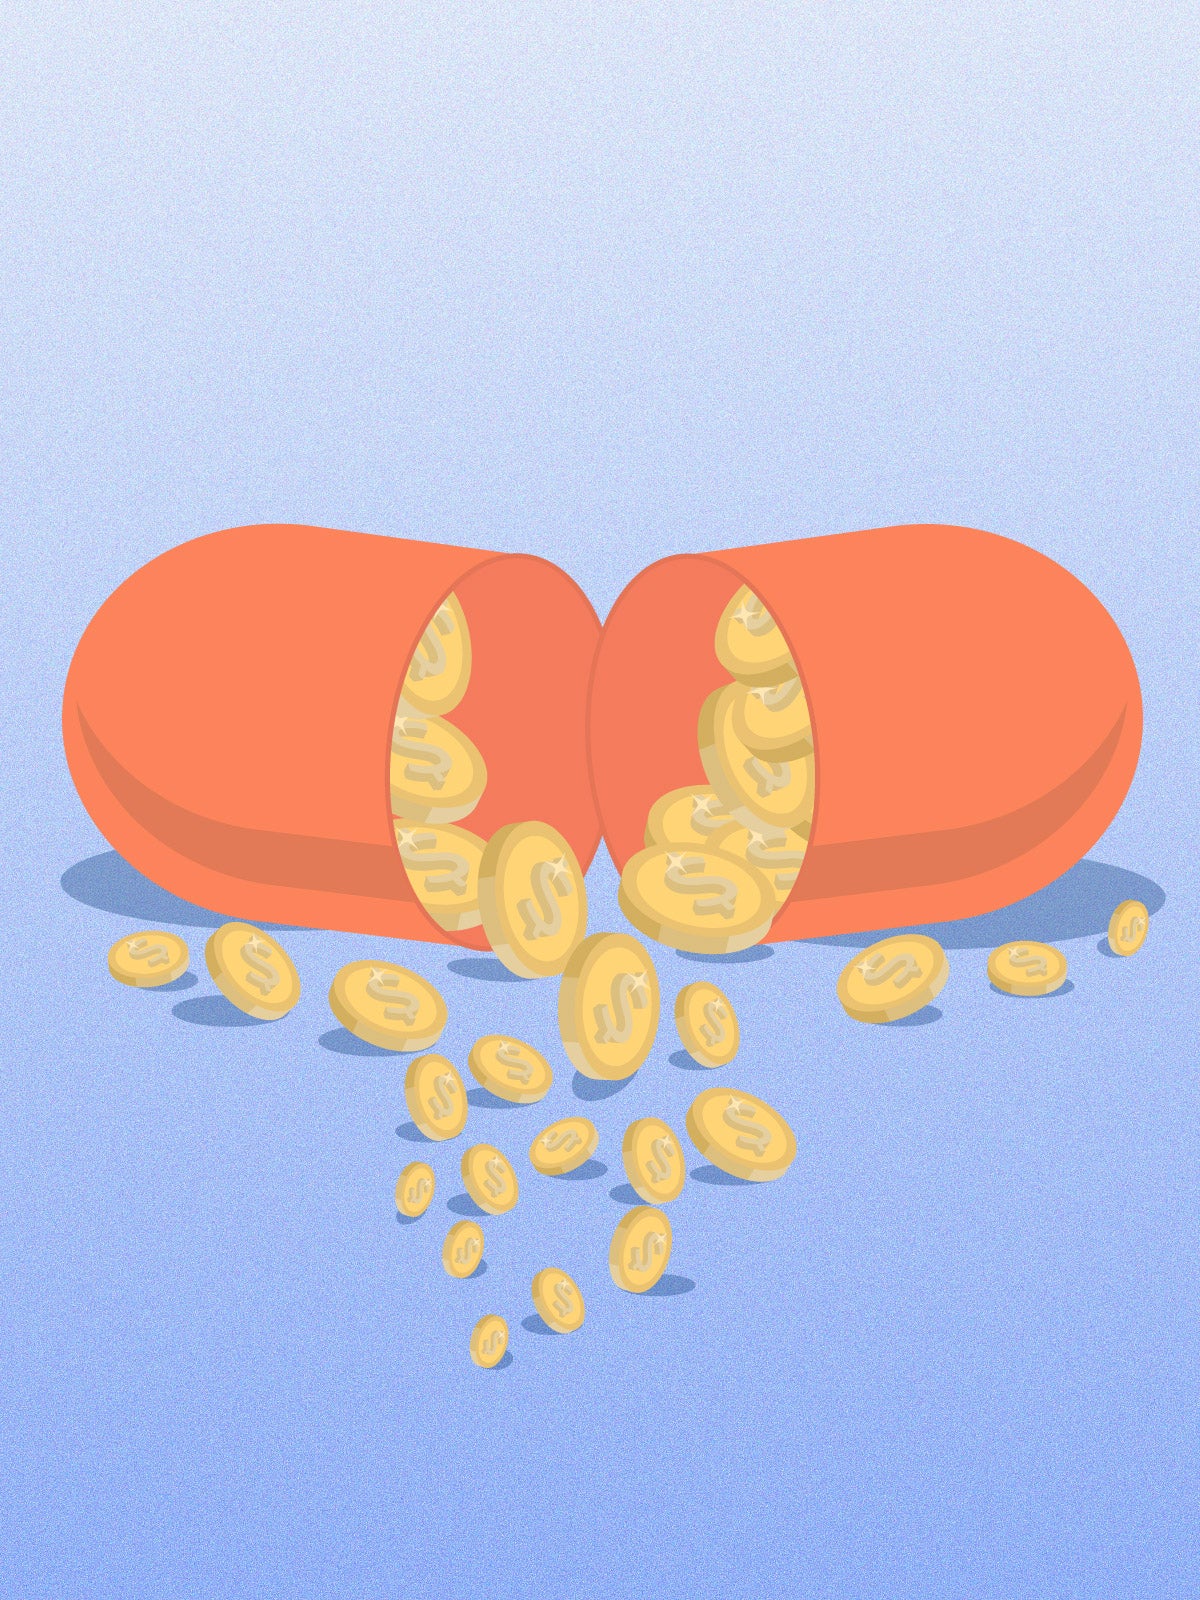 Conceptual illustration: A light orange pill is split in half. Yellow dollar coins are released from it and spill onto the surface. The composition is on a blueish-purple, speckled background.